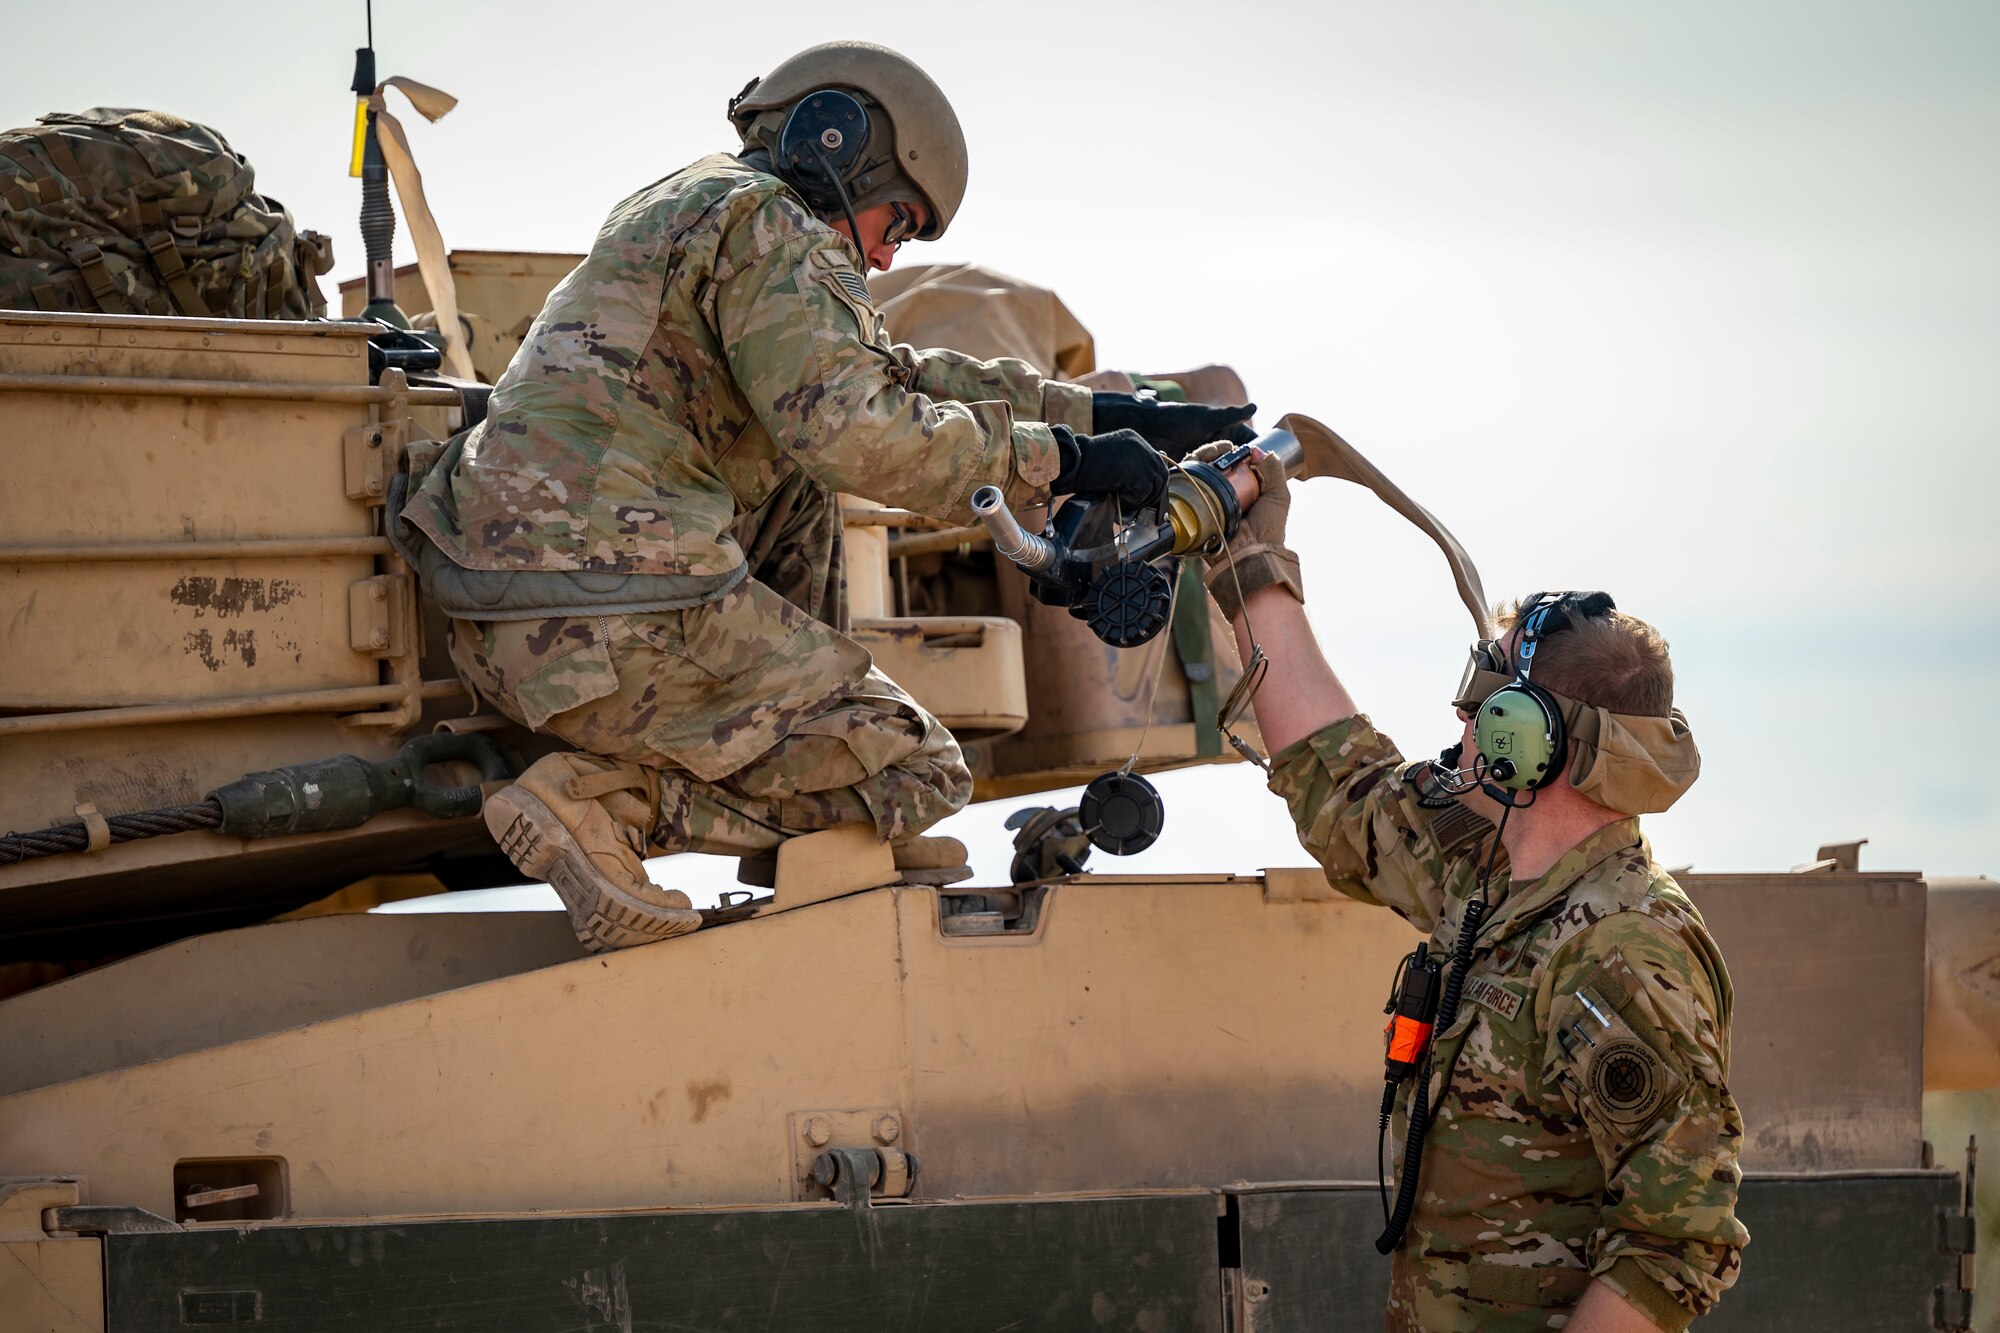 A U.S. Army member assigned to the 1st Armored Division grabs a fuel pump from Tech. Sgt. Christopher Hofer, 40th Airlift Squadron weapons instructor, after simulating refueling a M1A2 Abrams tank from a C-130J Super Hercules at Fort Bliss, Texas, Dec. 9, 2022. This exercise allowed aircrew with the C-130J to refuel Army ground vehicles enabling expeditious and mobile logistics for Army ground forces. (U.S. Air Force photo by Senior Airman Leon Redfern)